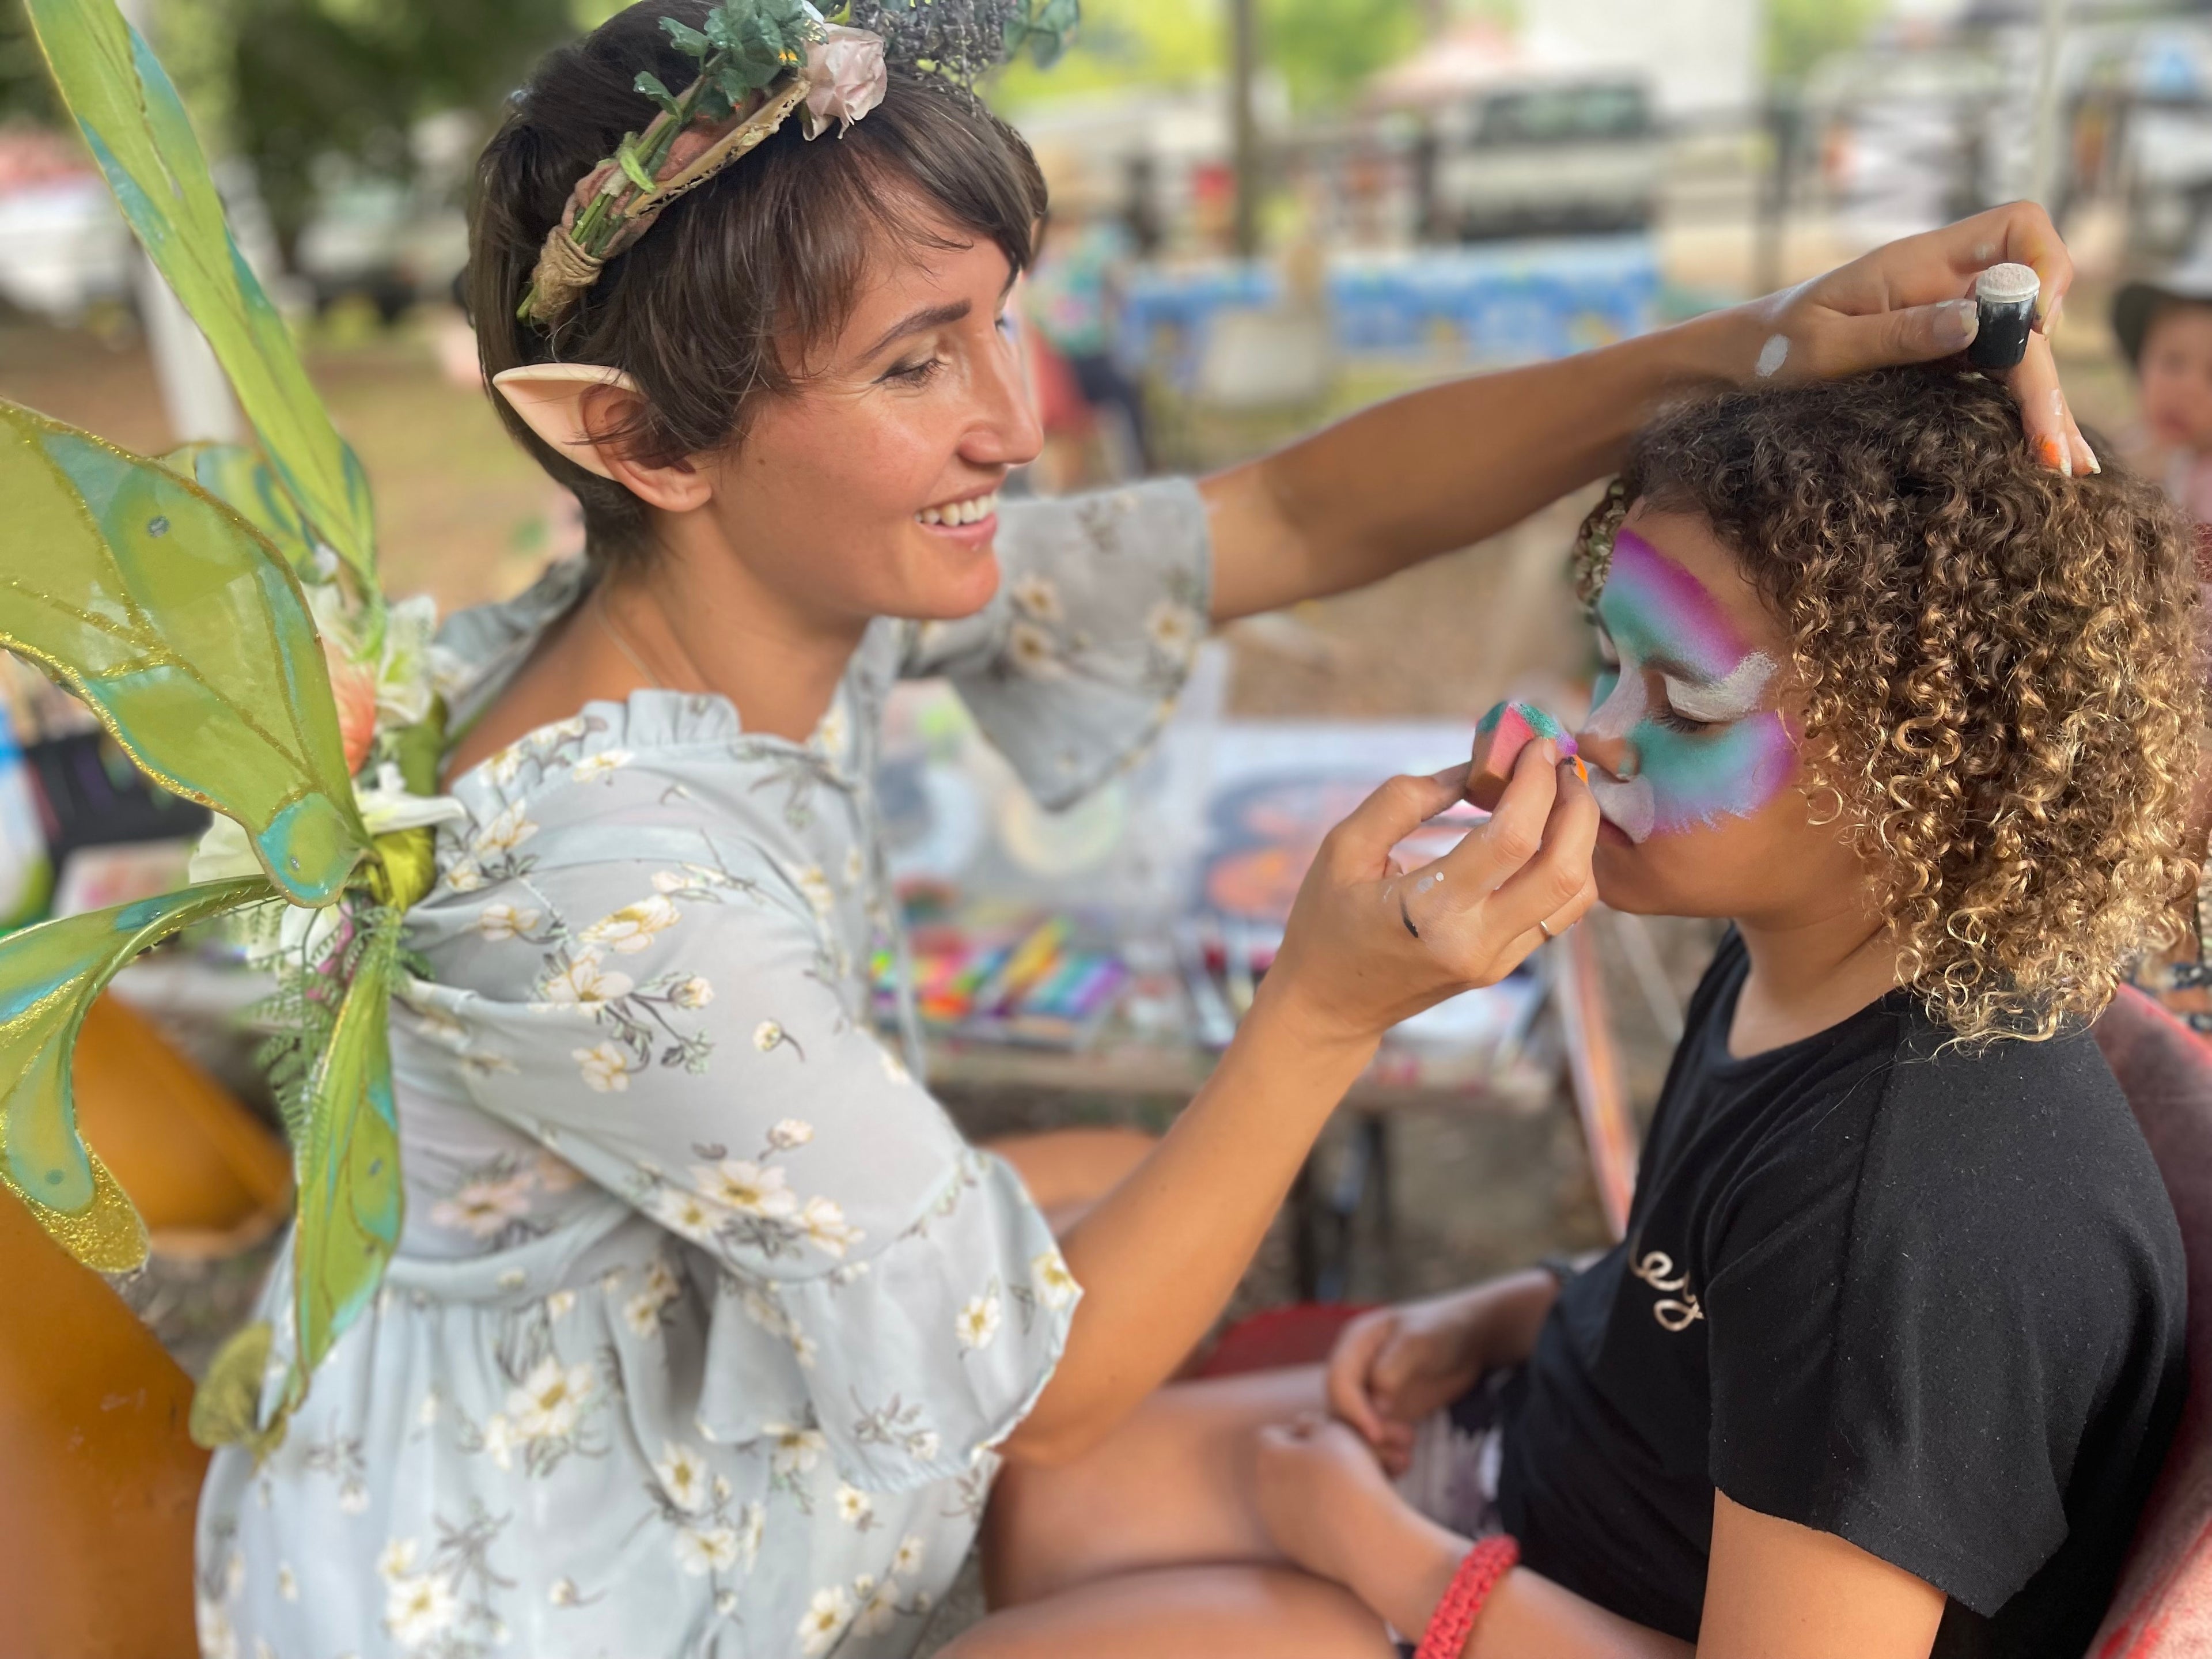 Deal: $99 for Two-Hour Face Painting Party At Your Location ($190